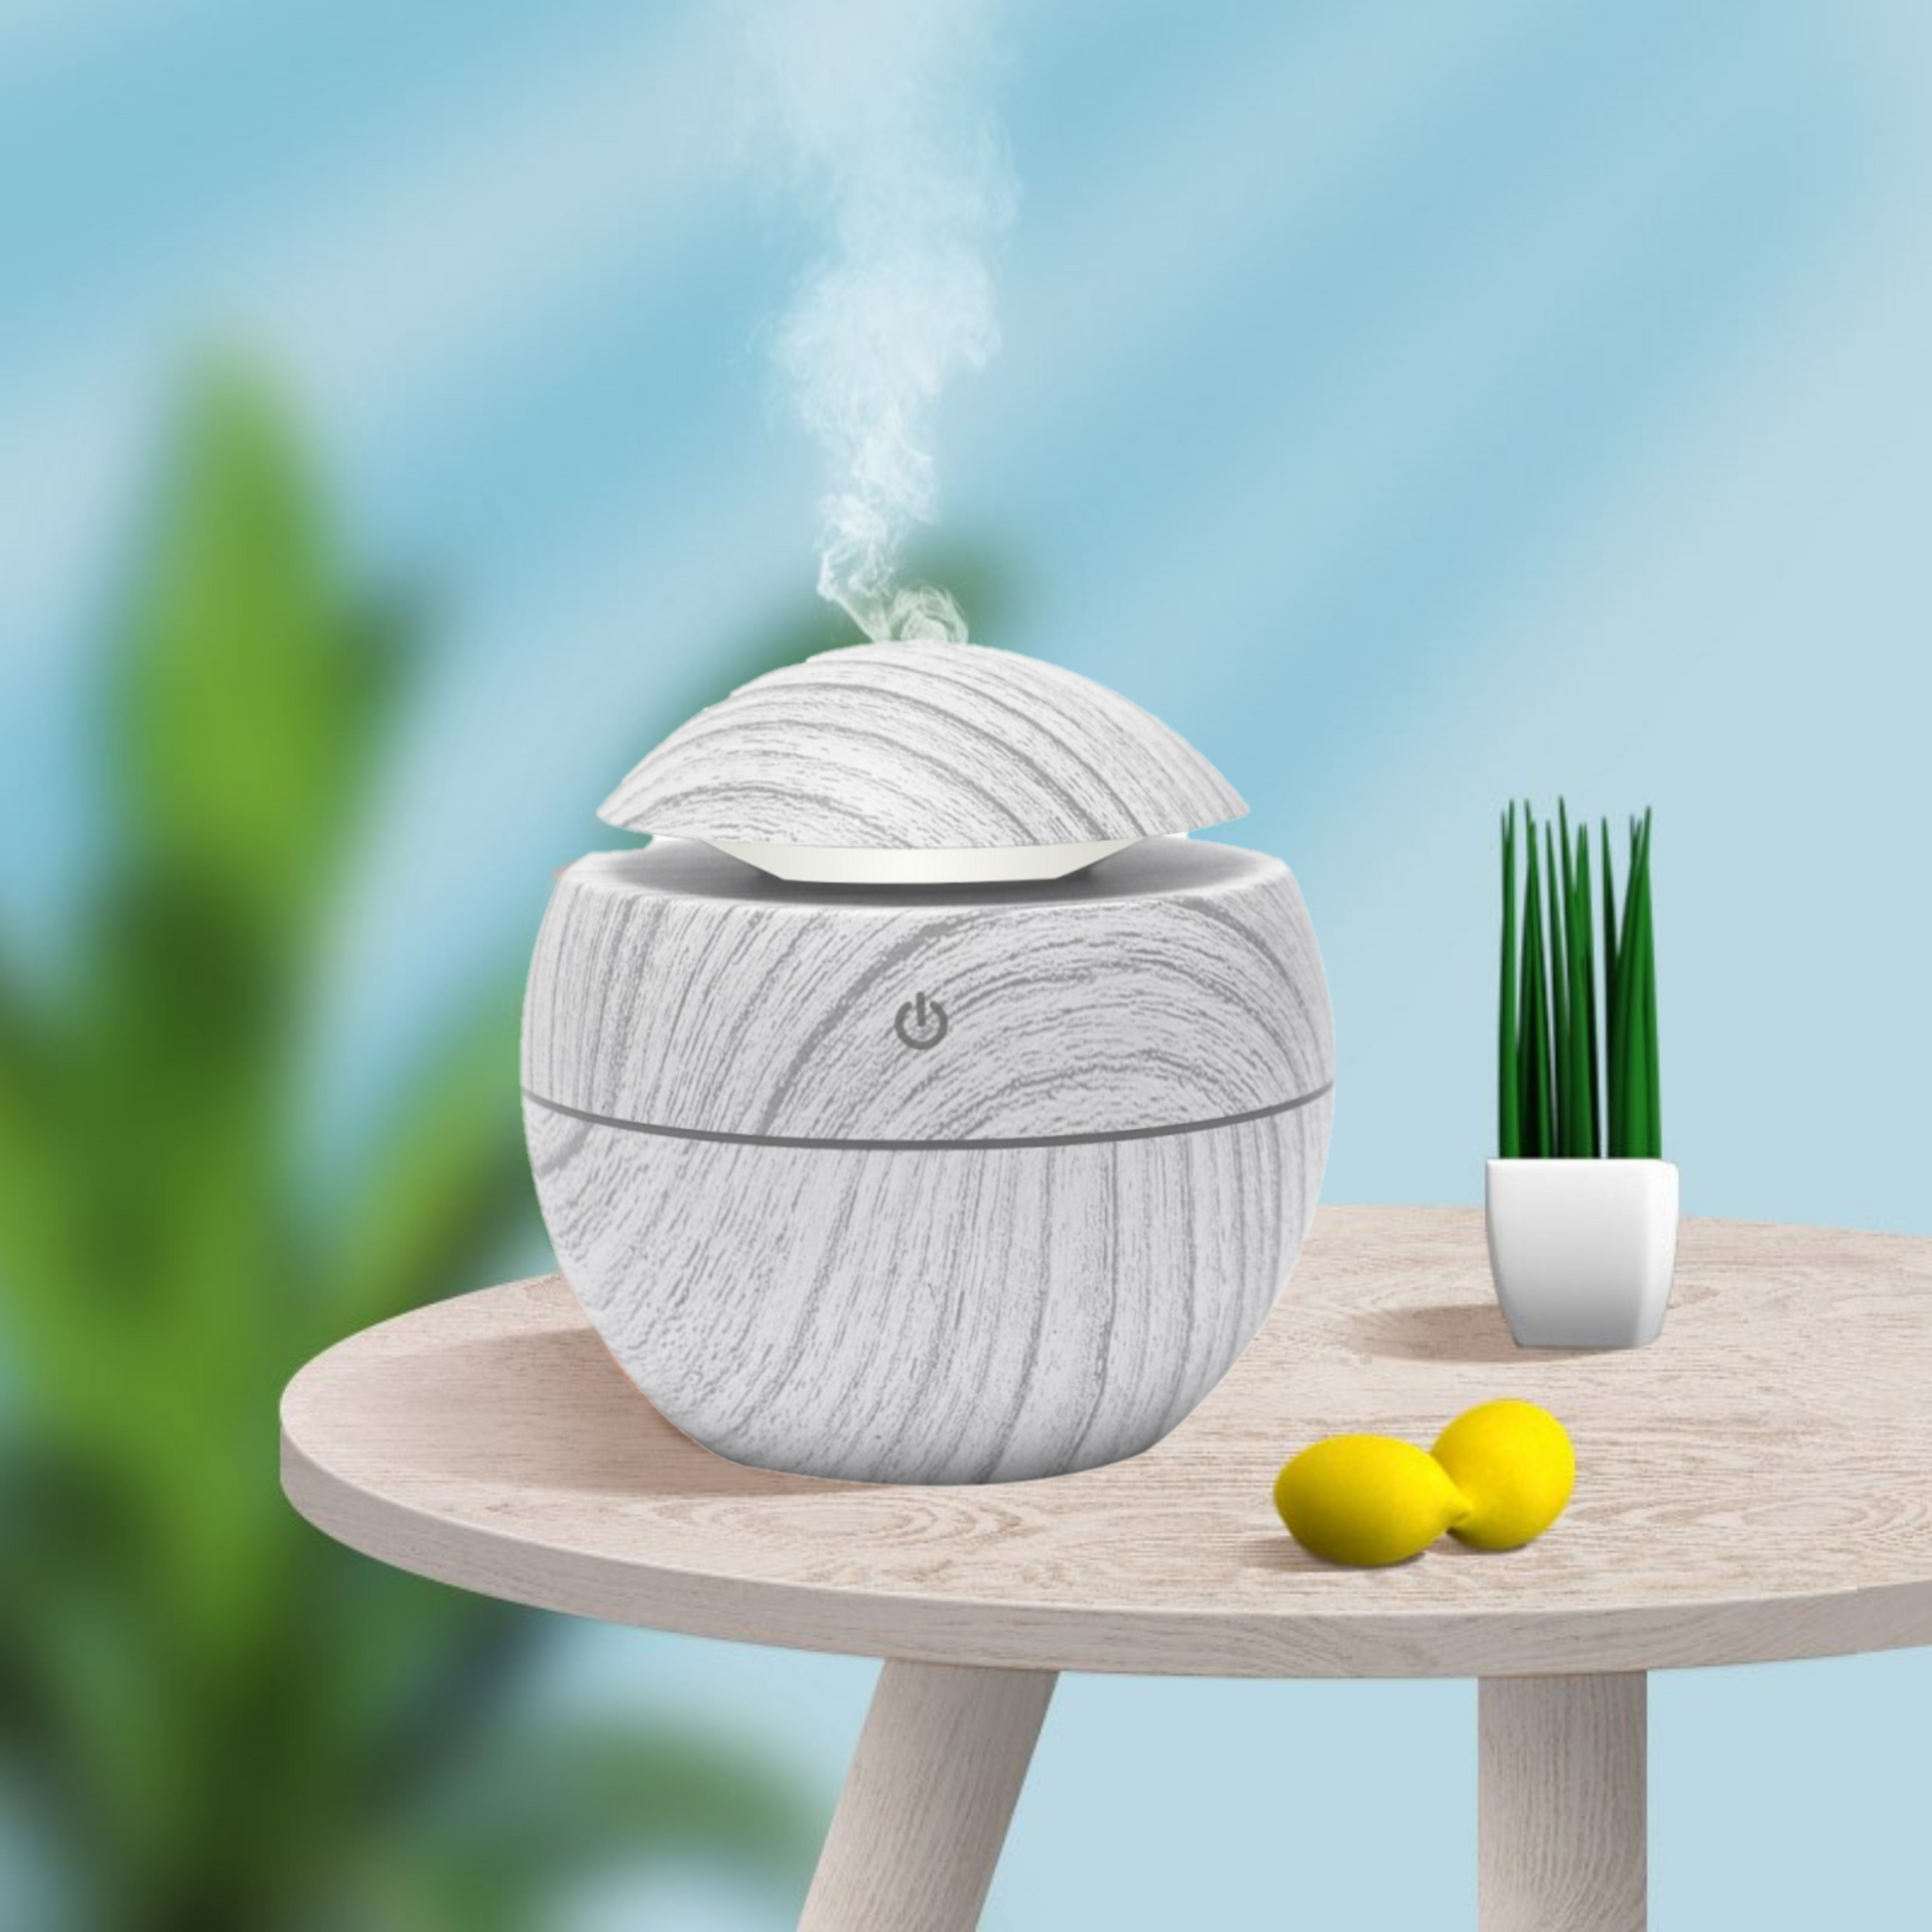     MOLOO-Aroma-Difusser-Grijs-Luchtbevochtiger-luchtverfrisser-Aroma-therapie-LED-USB